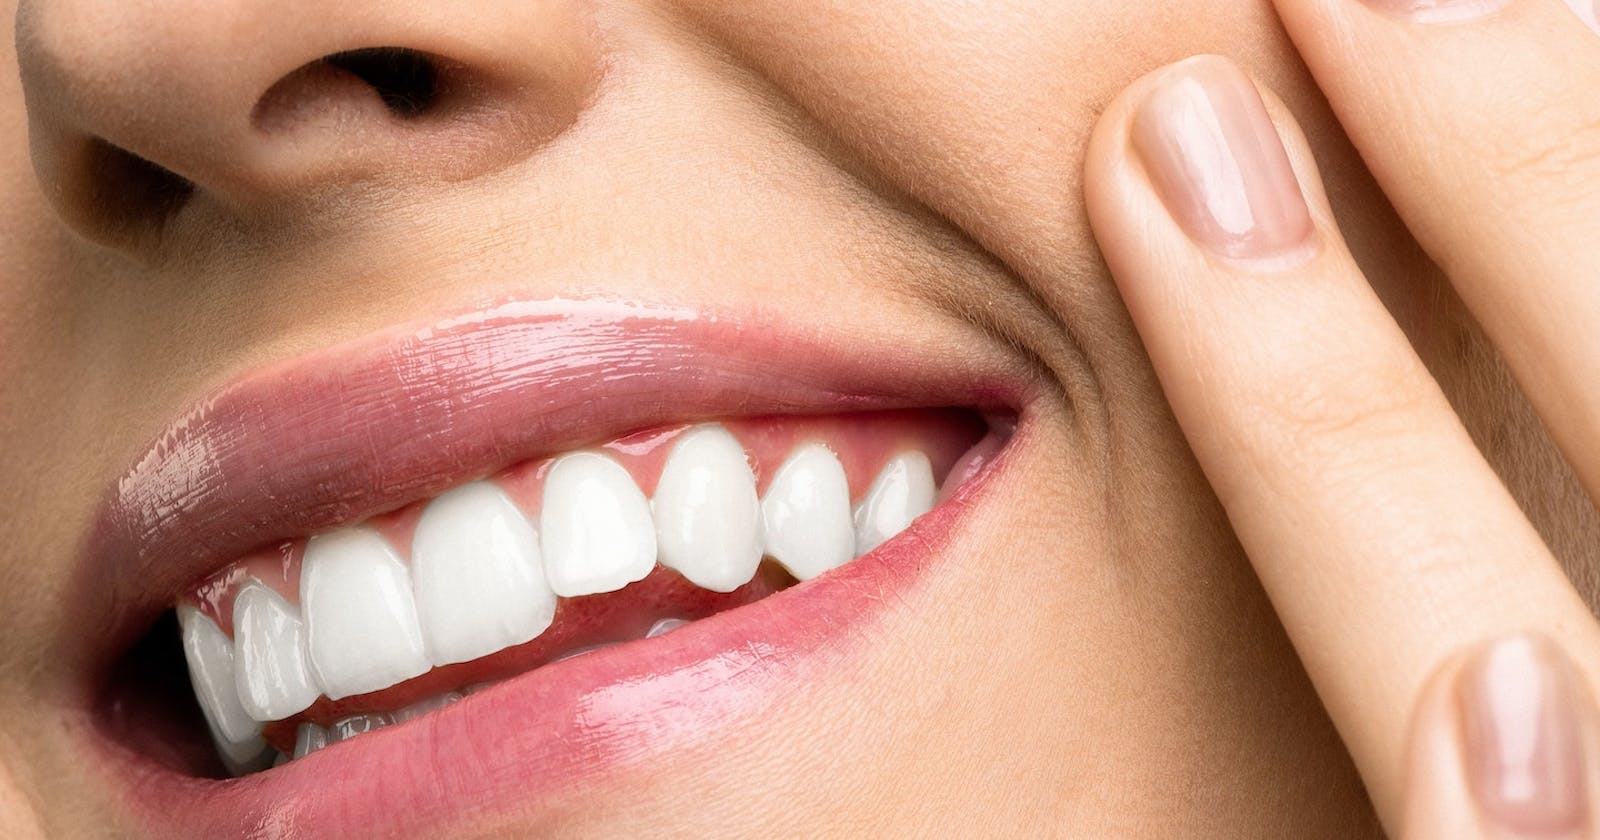 Beyond the Brightness: Exploring Potential Risks of Teeth Whitening